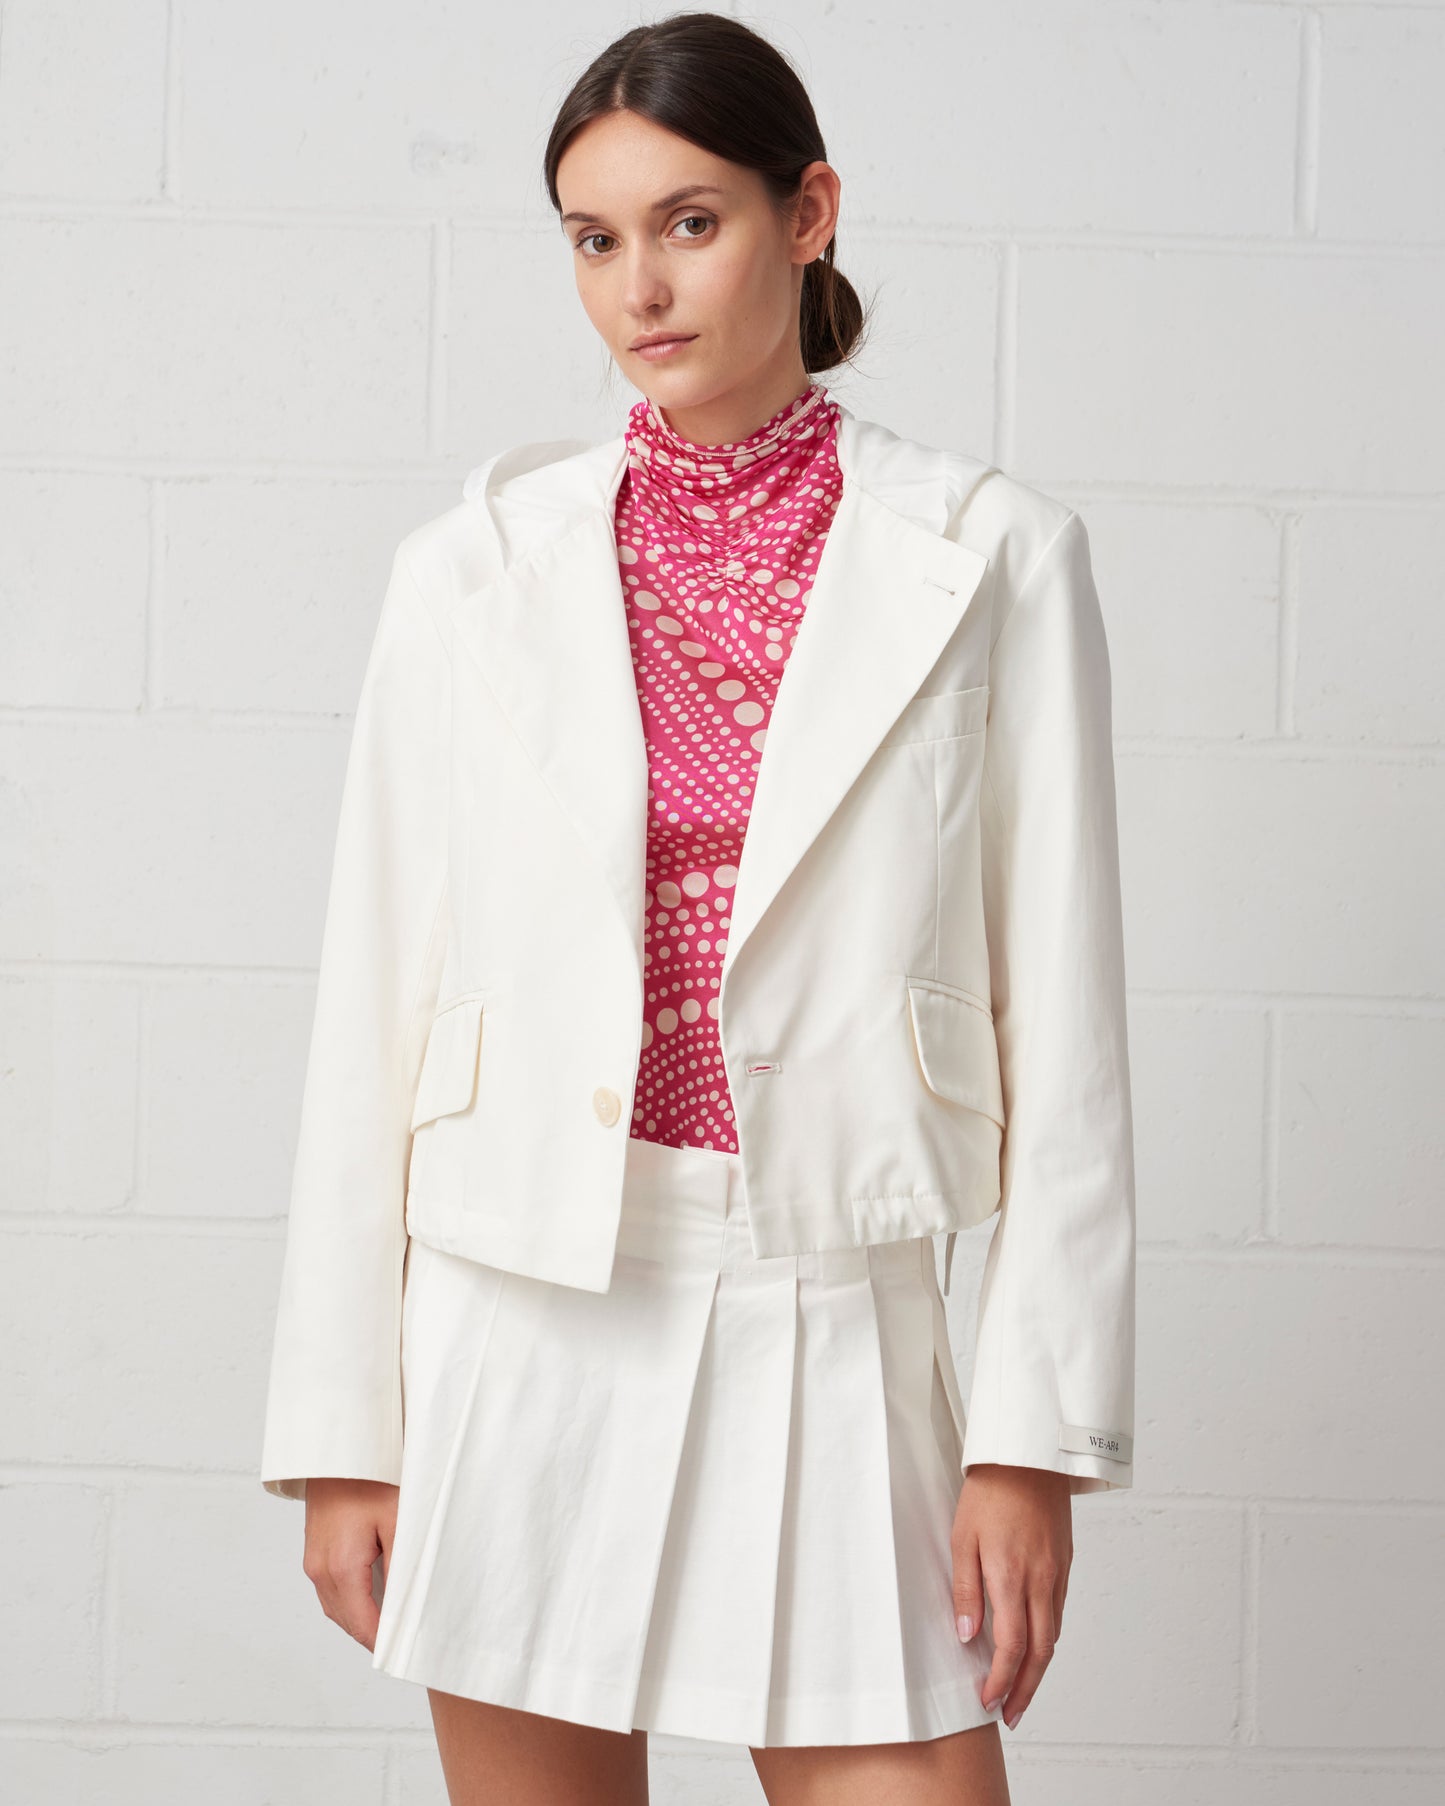 The Cropped Hooded Blazer